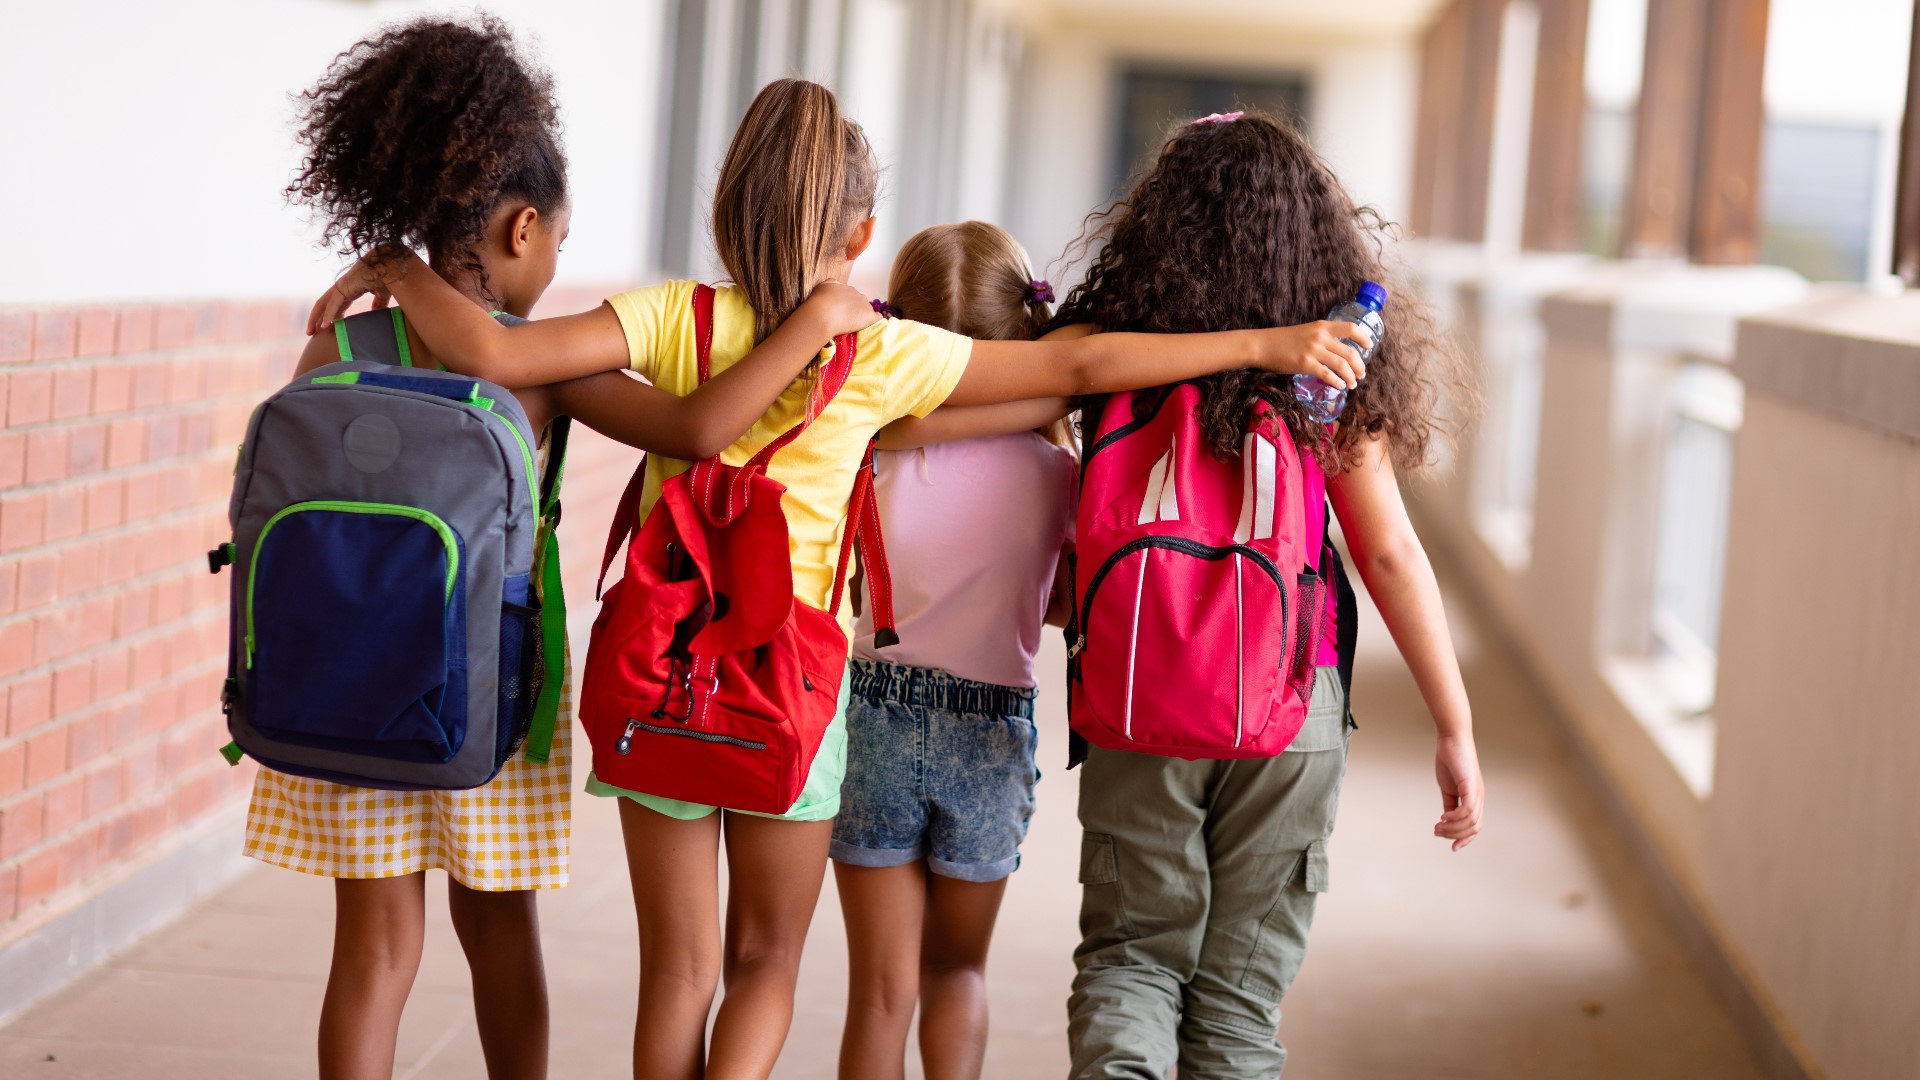 Around 7,000 children go to the emergency room each year due to backpack injuries, according to the Consumer Product Safety Commission.